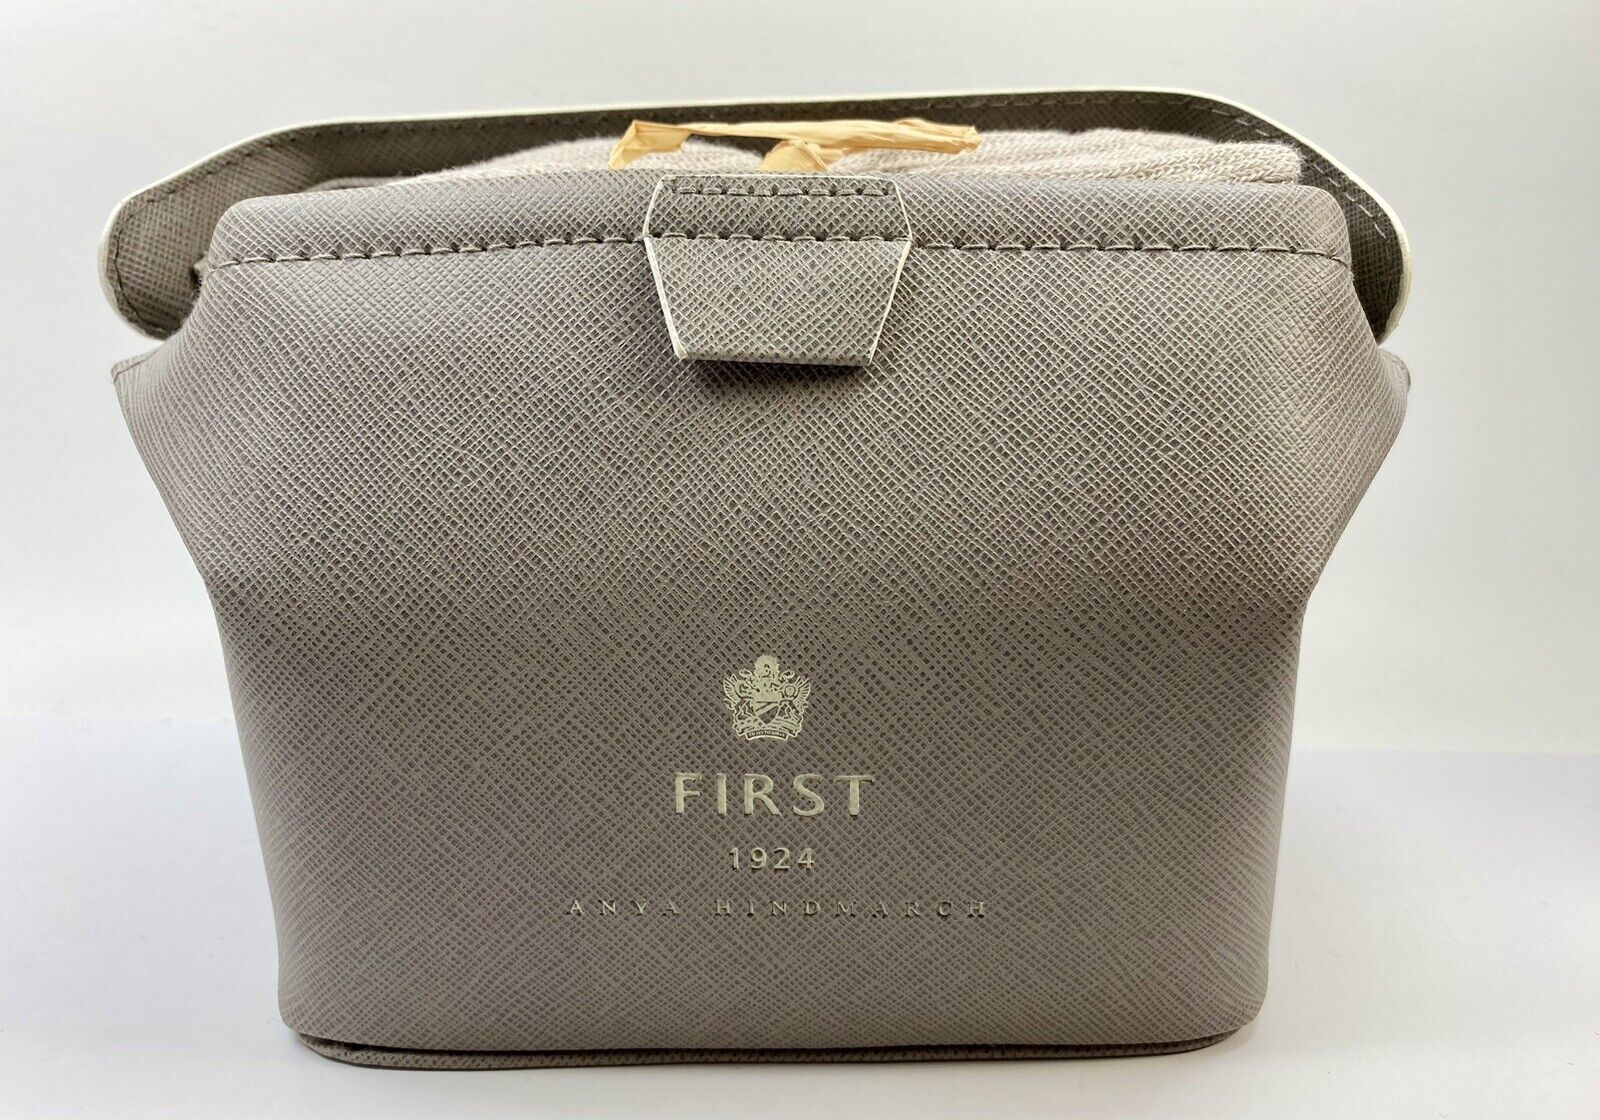 Anya Hindmarch First Class British Airways 1924 Limited Edition Amenity Kit